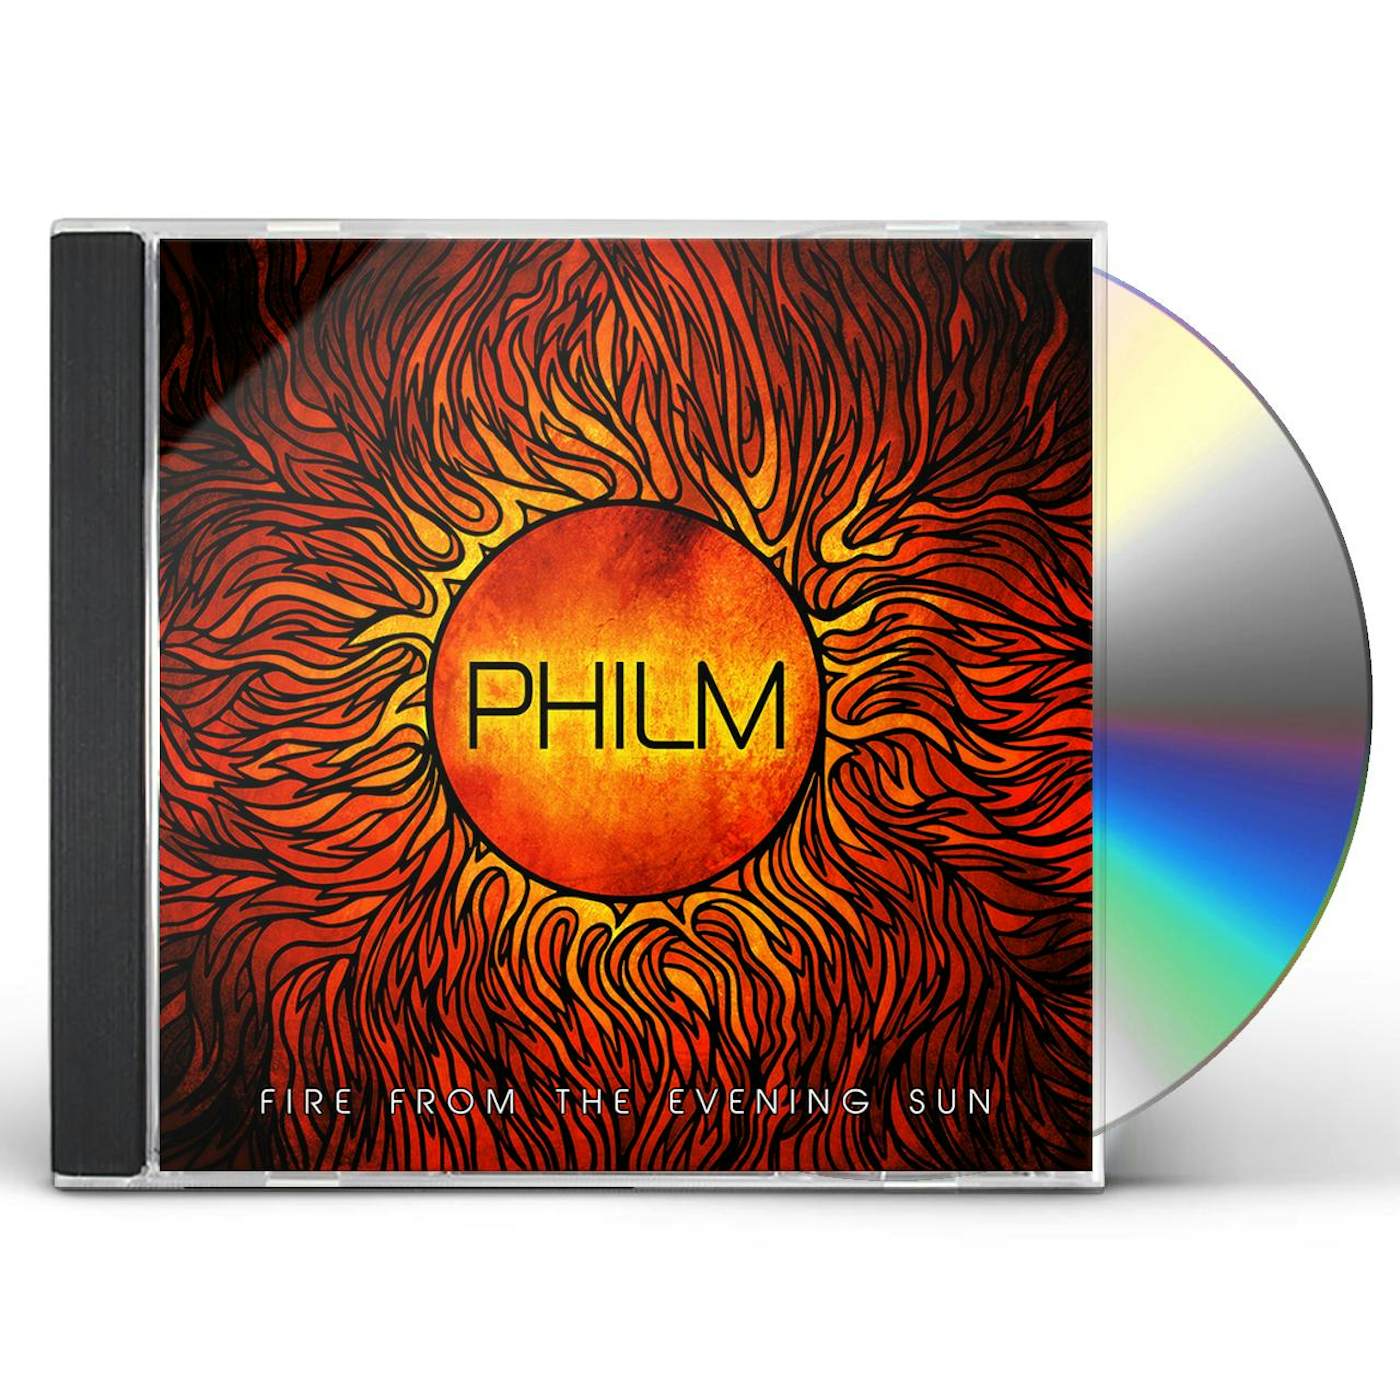 PHILM FIRE FROM THE EVENING SUN CD